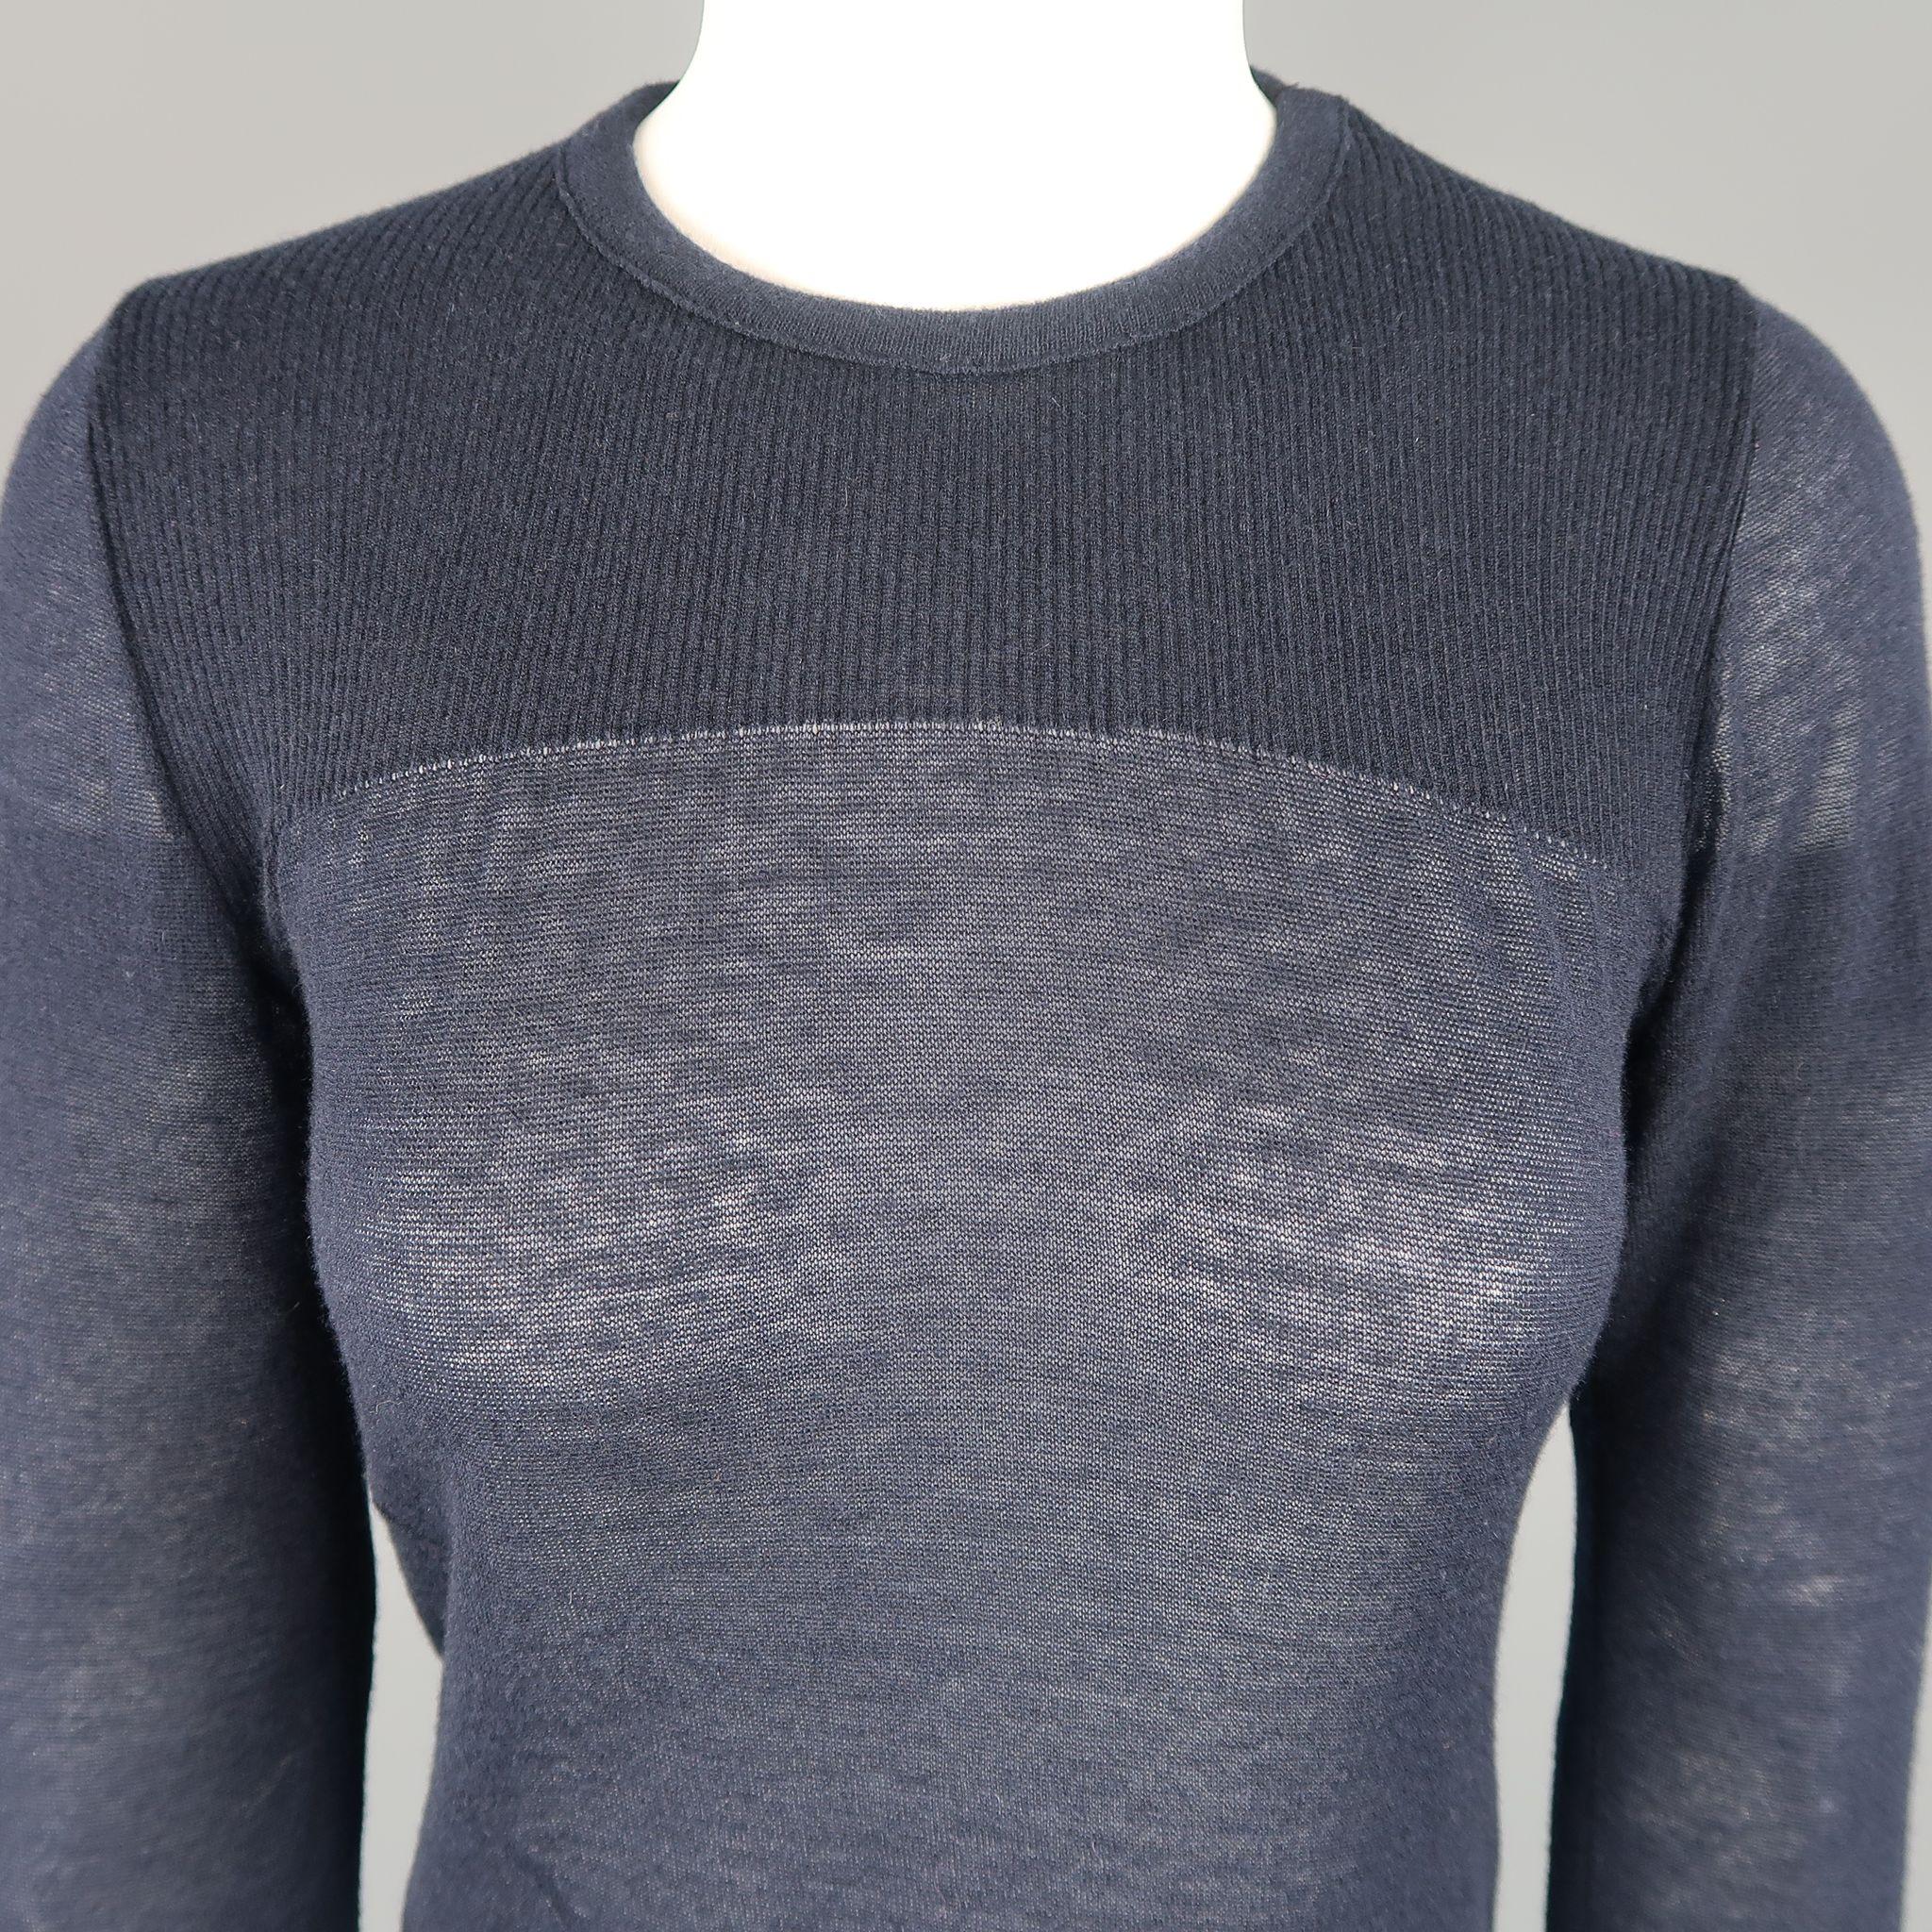 ISABEL MARANT pullover comes in navy ultra sheer burnout cashmere with a round neck, ribbed chest, diagonal seam, and slit hem. Made in France.

Good Pre-Owned Condition.
Marked: L

Measurements:

l Shoulder: 13 in.
l Bust: 34 in.
l Sleeve: 25 in.
l